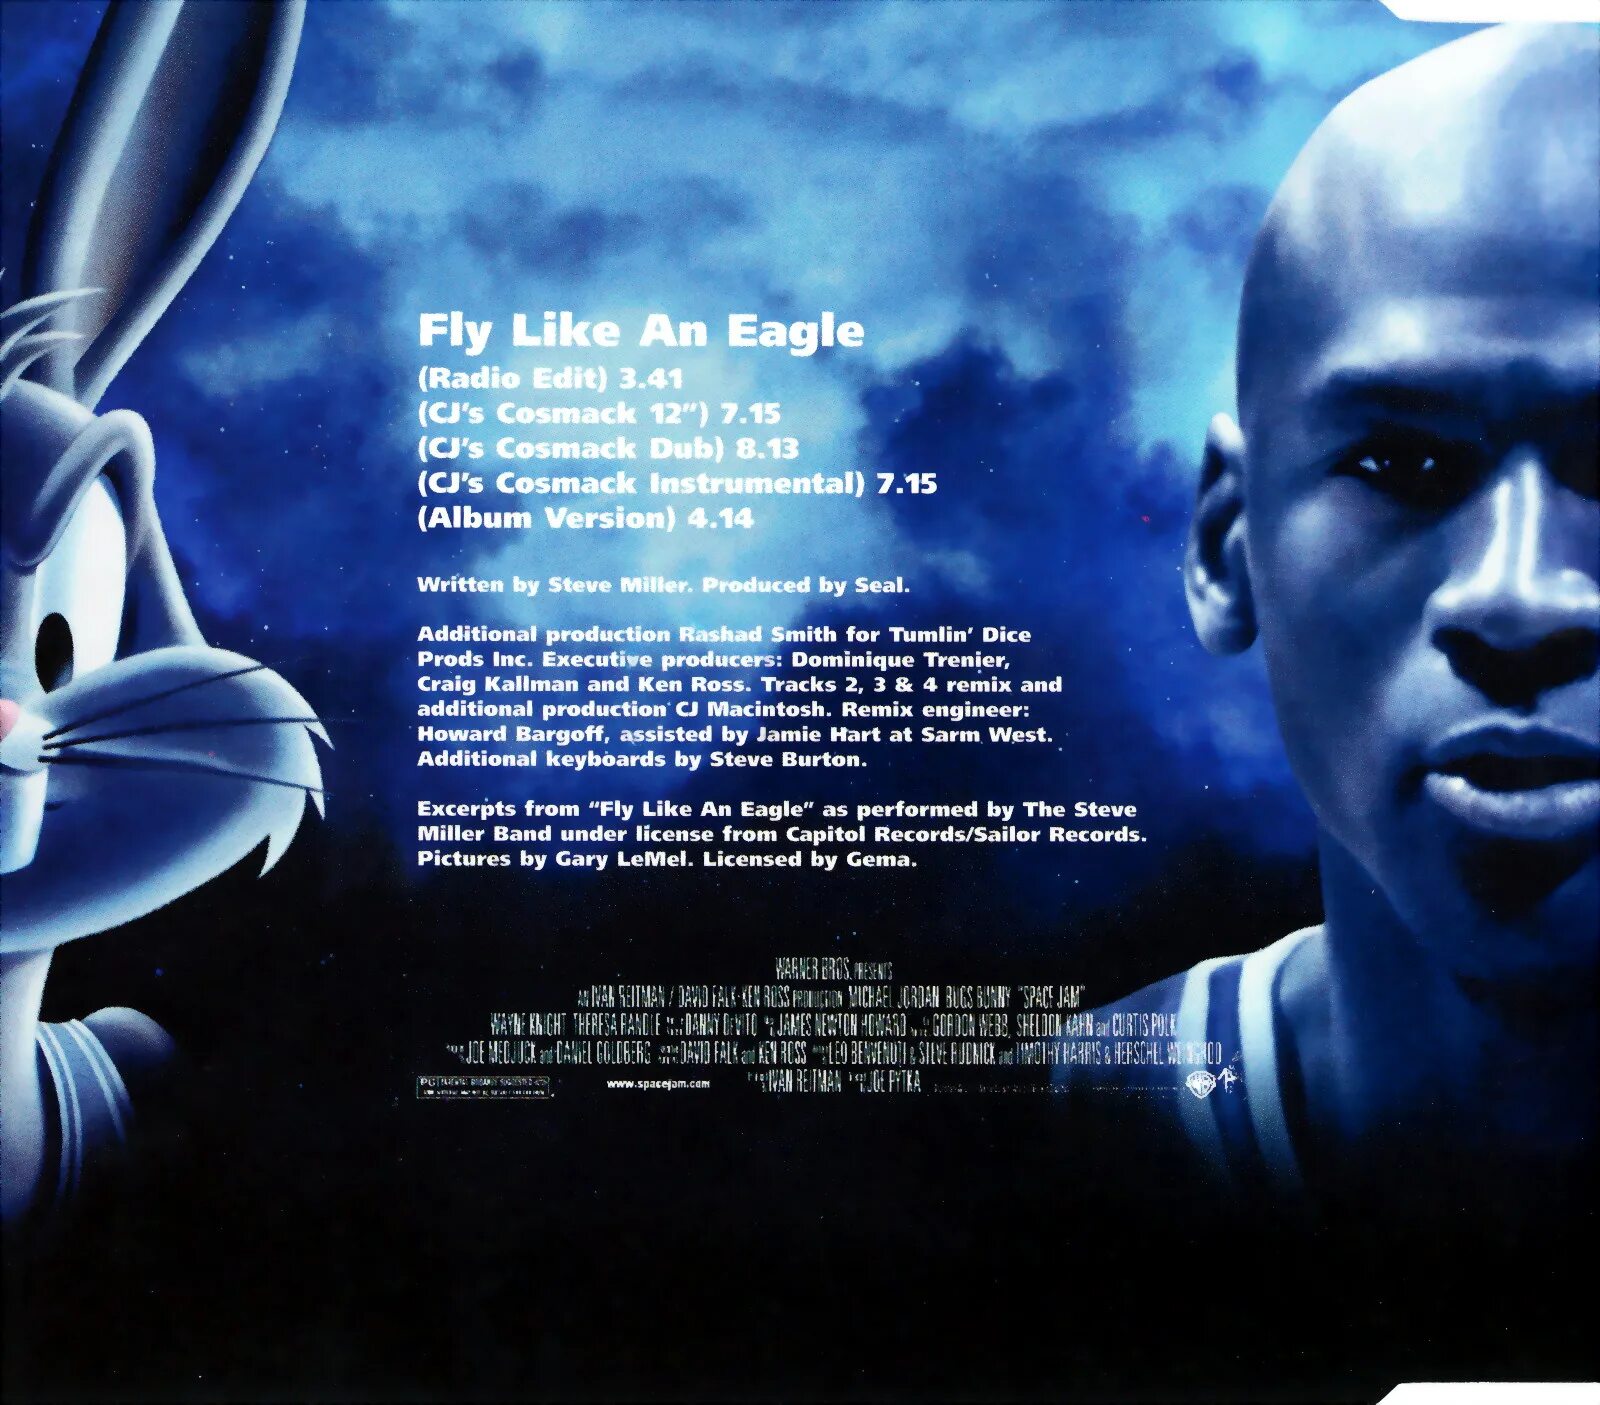 Like flying. Seal Fly like. Seal Fly like an Eagle. Seal Fly like an Eagle Single FLAC. Fly like an Eagle Cover.